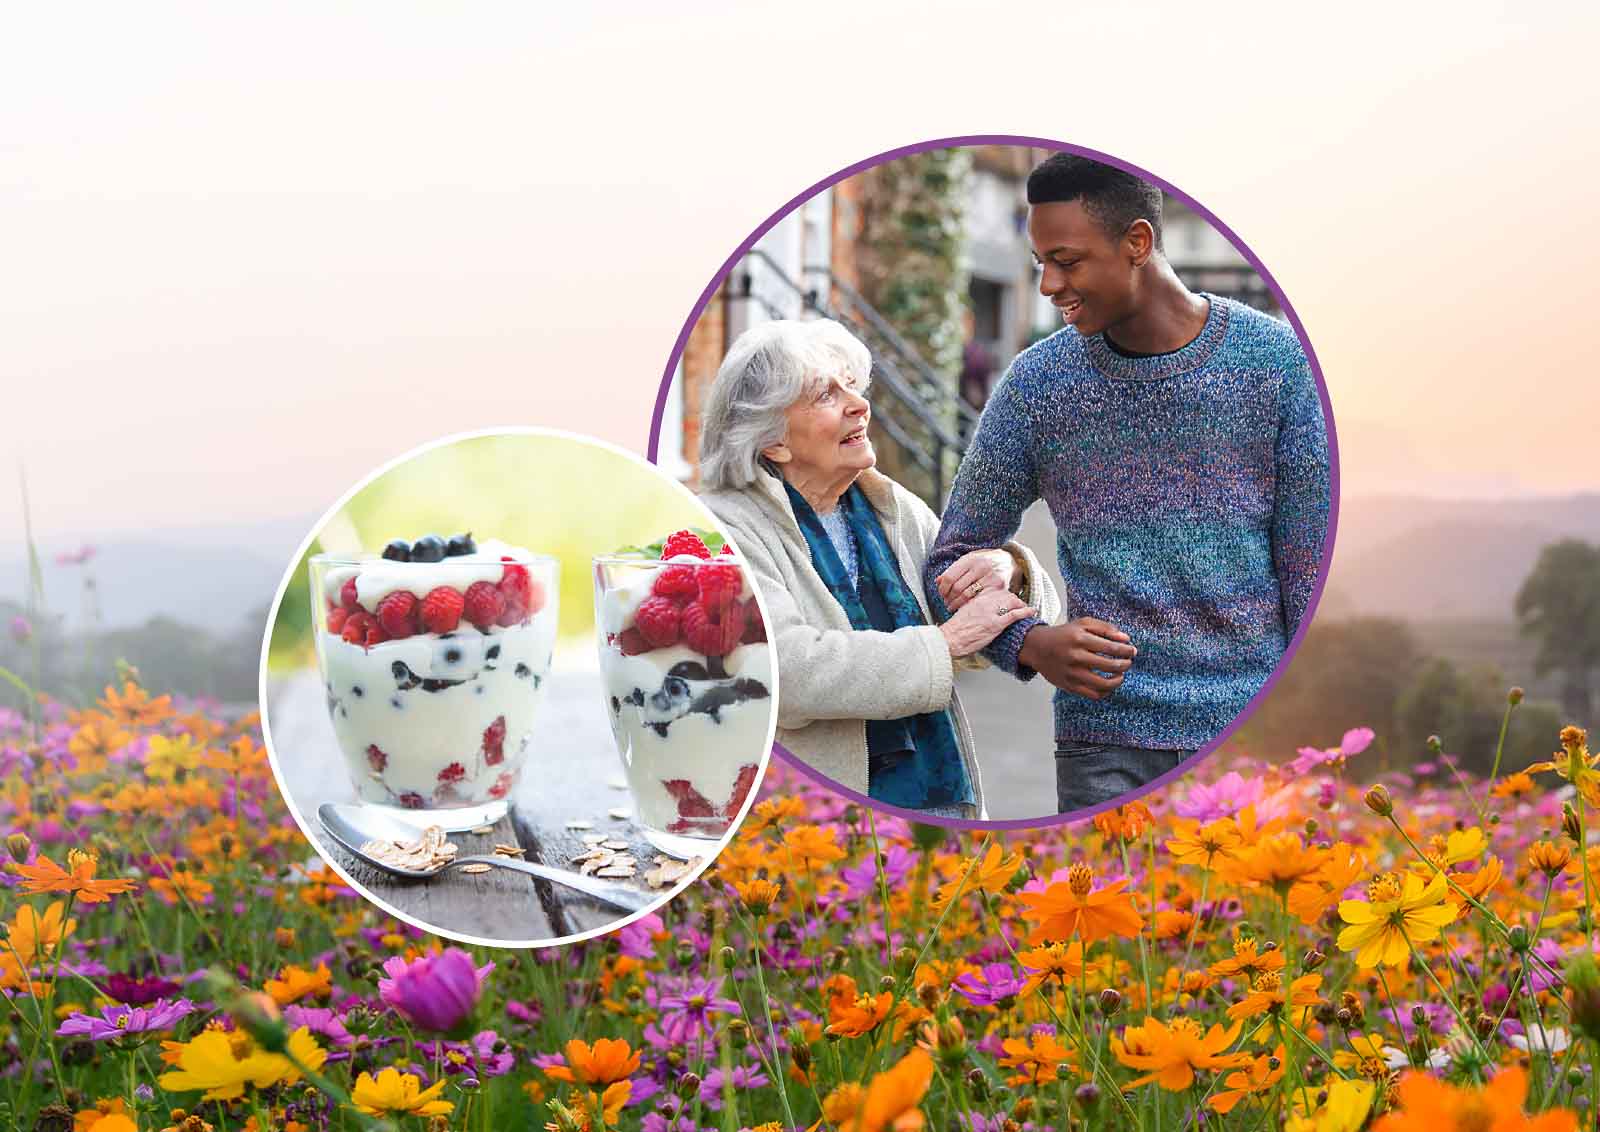 Photo illustration featuring a field of flowers, healthy desert and a young man assisting an elderly woman.